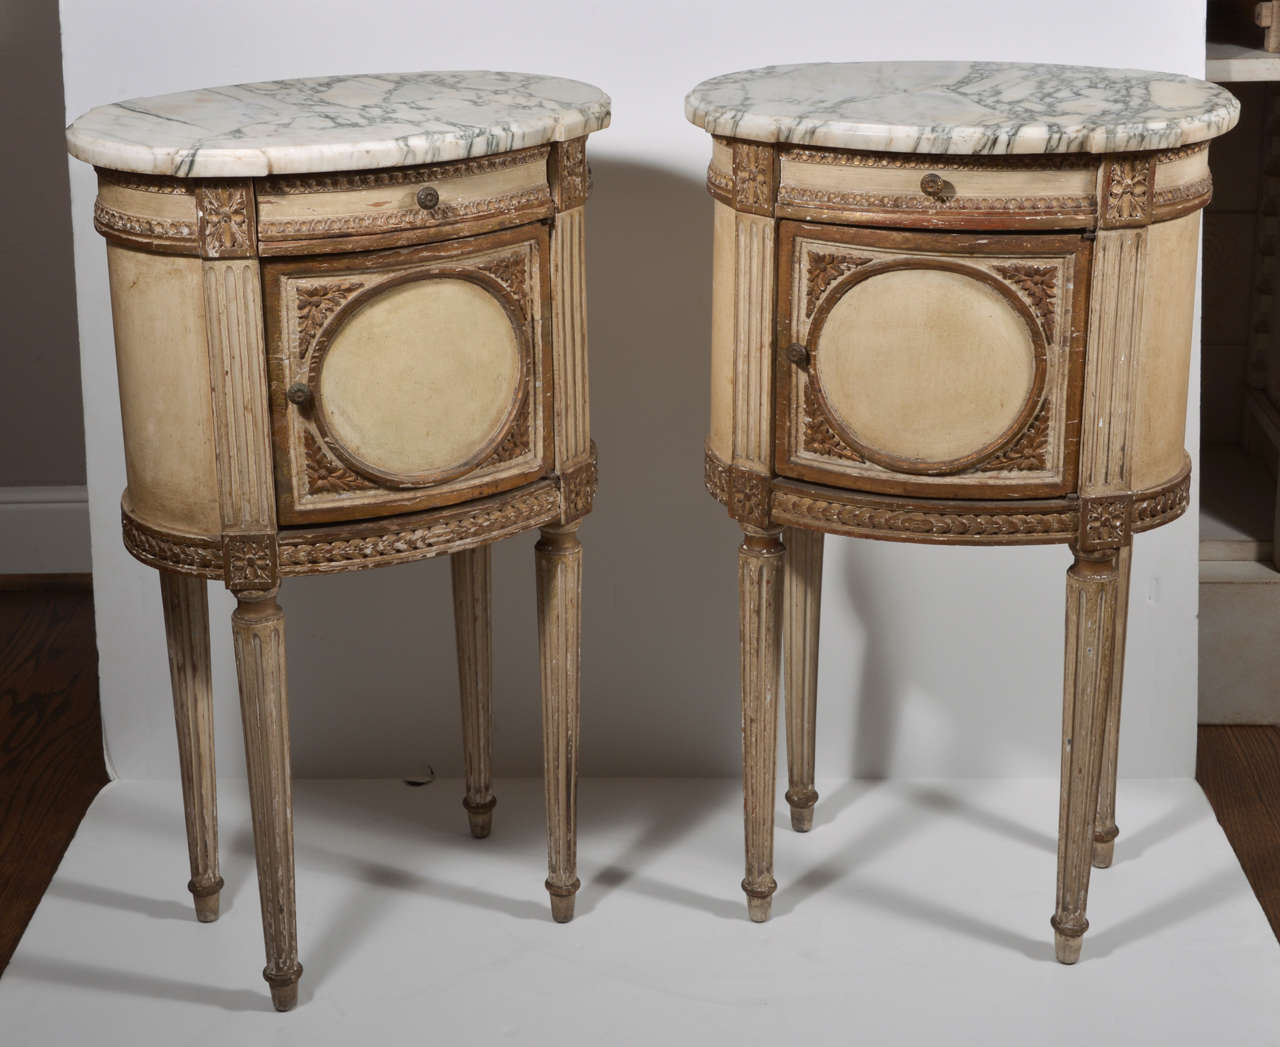 Pair of night stands featuring carved details and partial paint with gold accents. Single drawers over the doors for extra interior storage. Beveled marble tops are 7/8